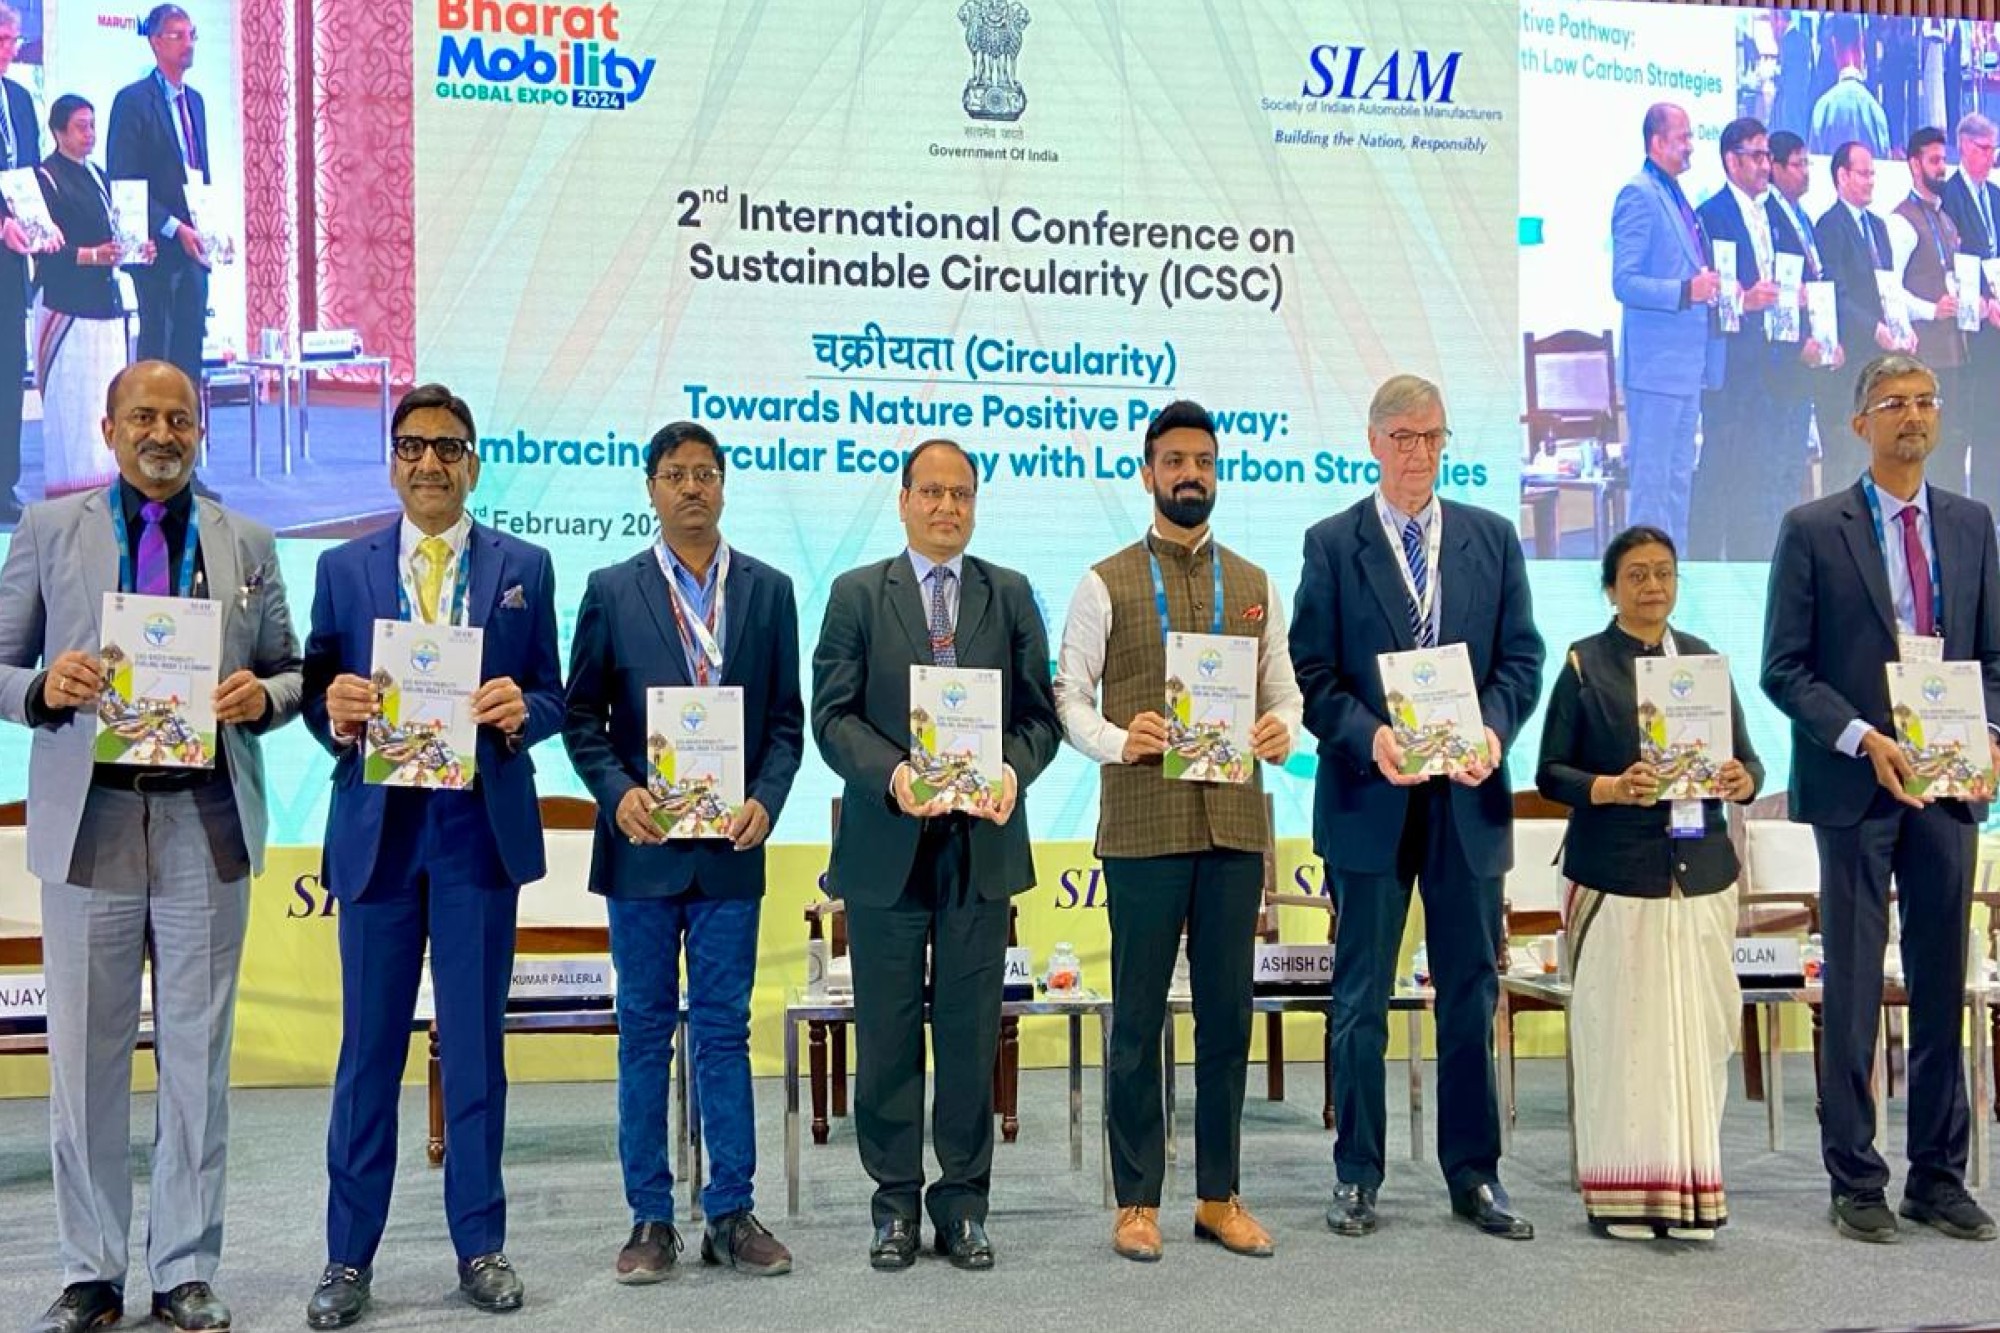 SIAM organises the International Conference on Sustainable Circularity